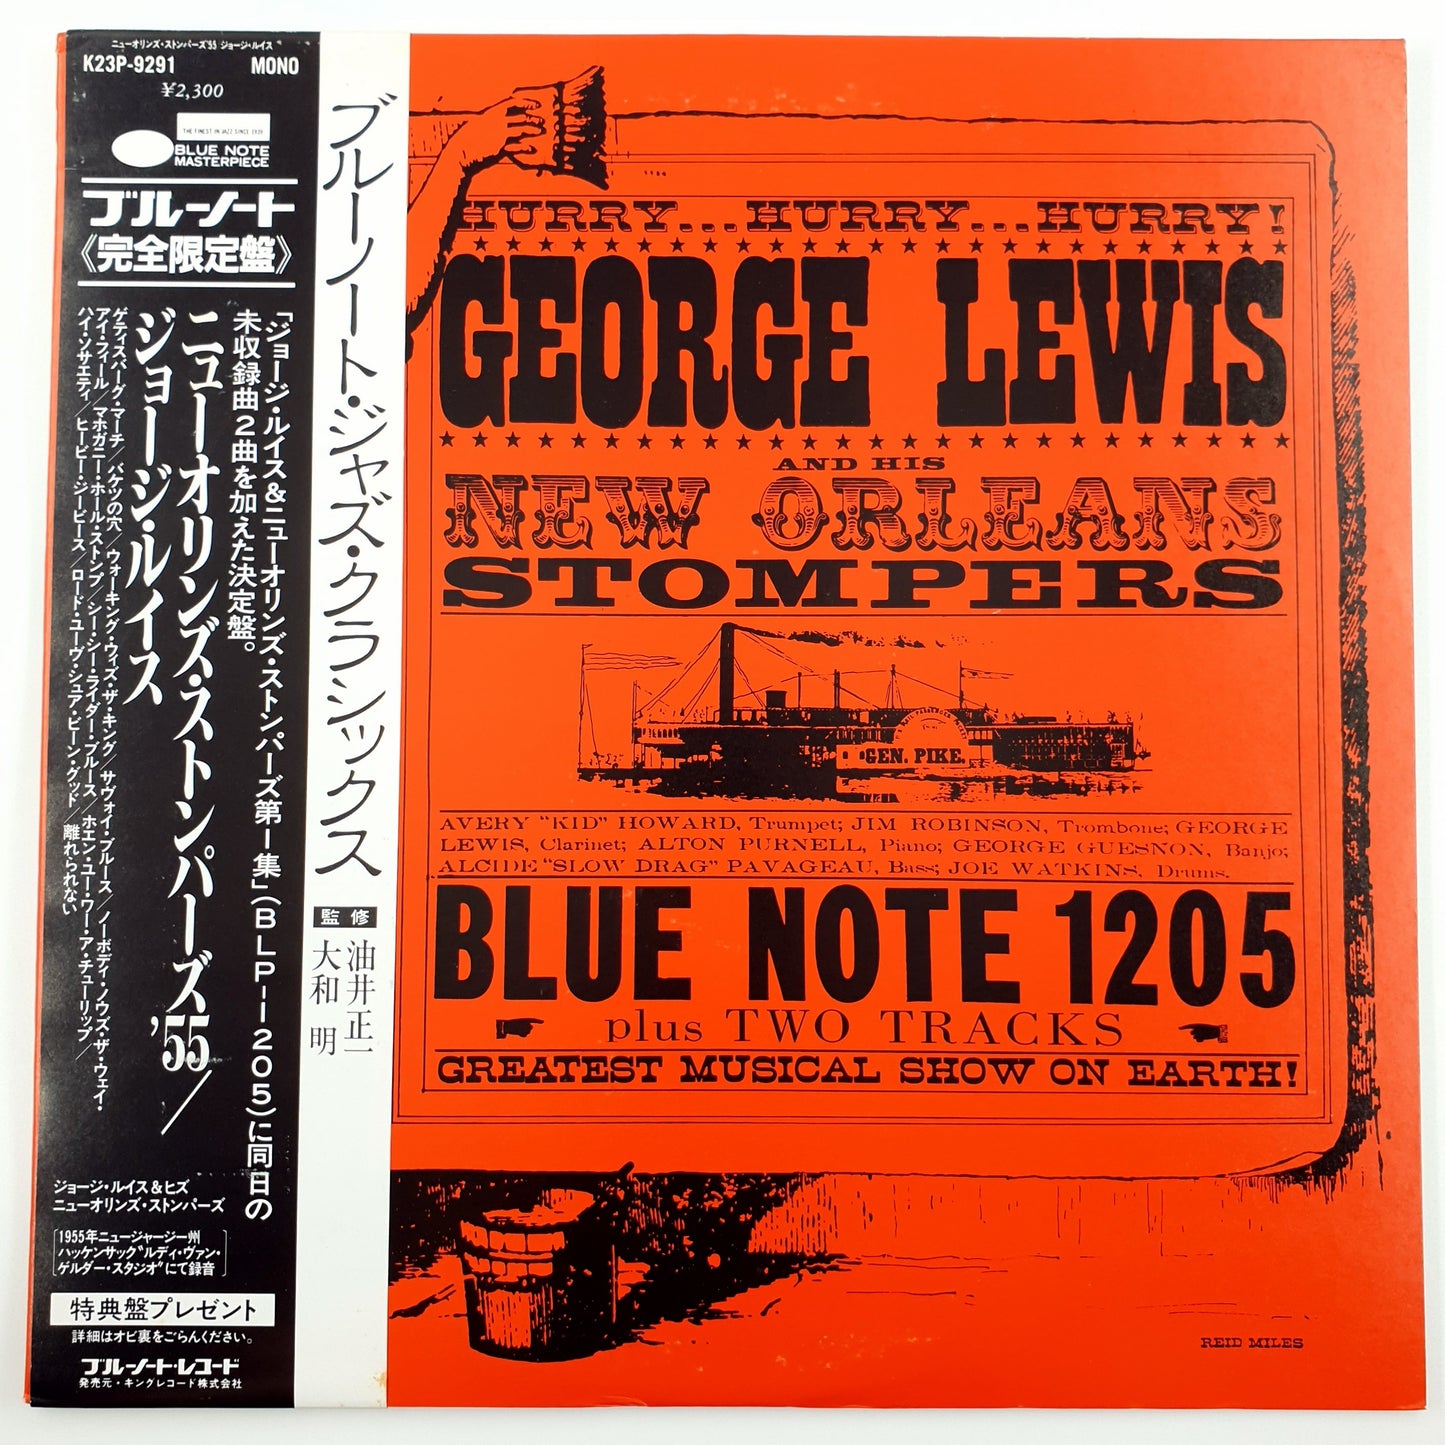 George Lewis And His New Orleans Stompers – George Lewis And His New Orleans Stompers (Volume 1)